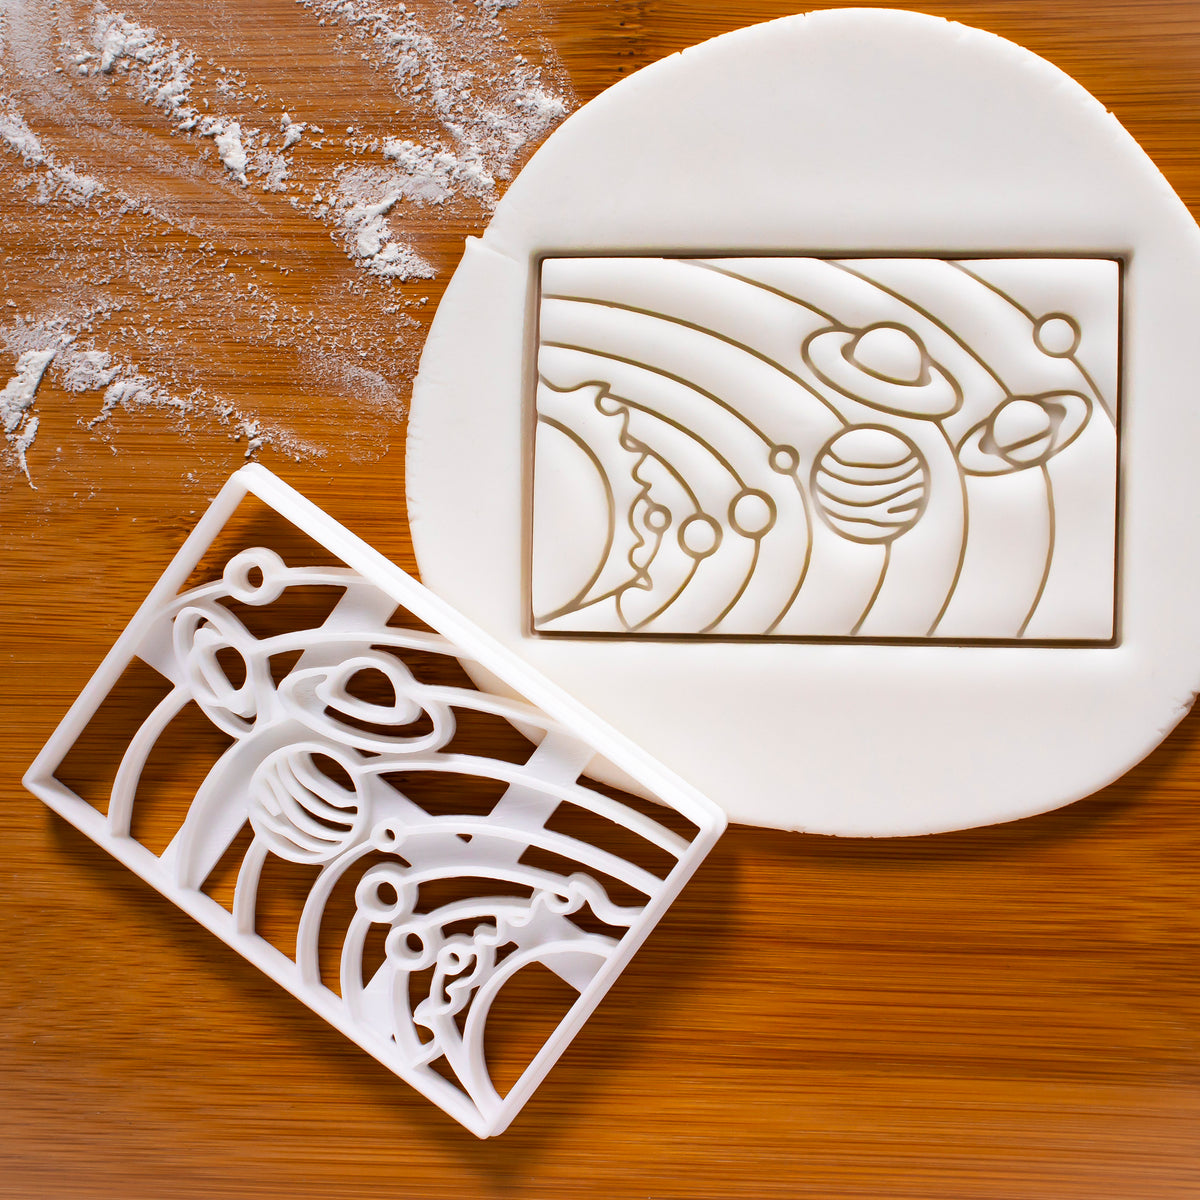 Solar System Cookie Cutter